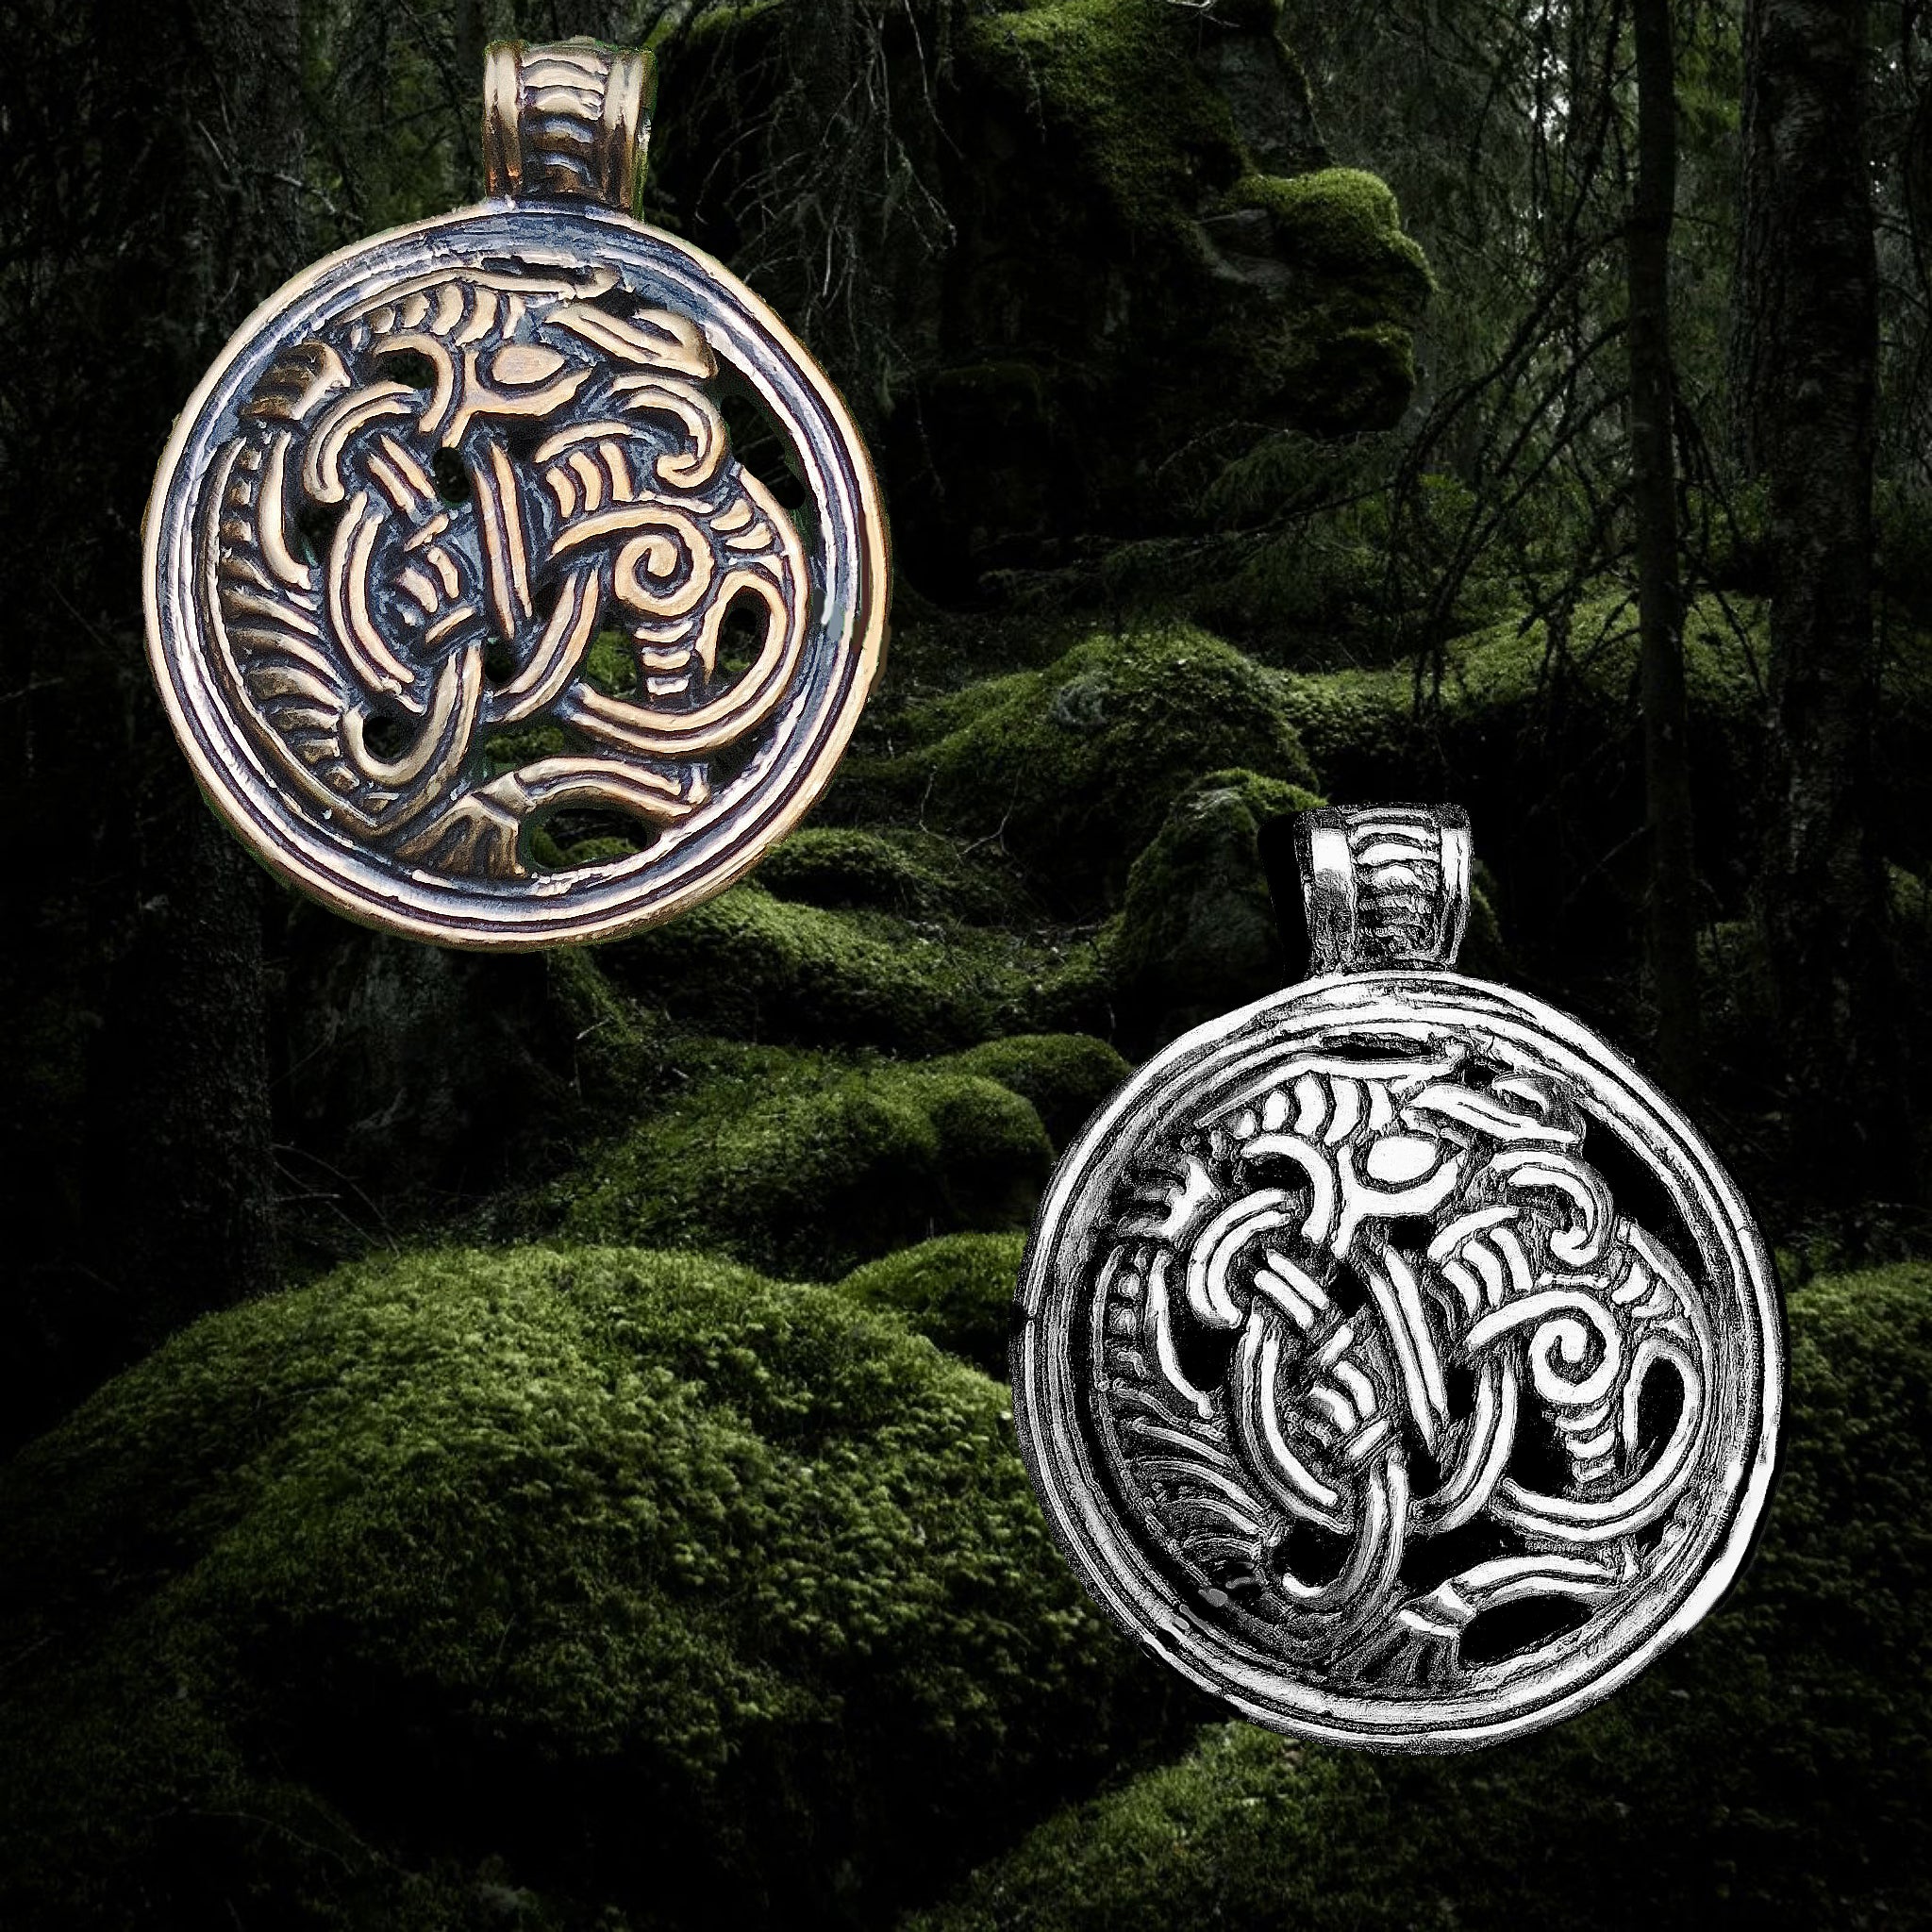 Round Dragon Beast Pendants in Bronze and Silver - Viking Jewelry from The Viking Dragon